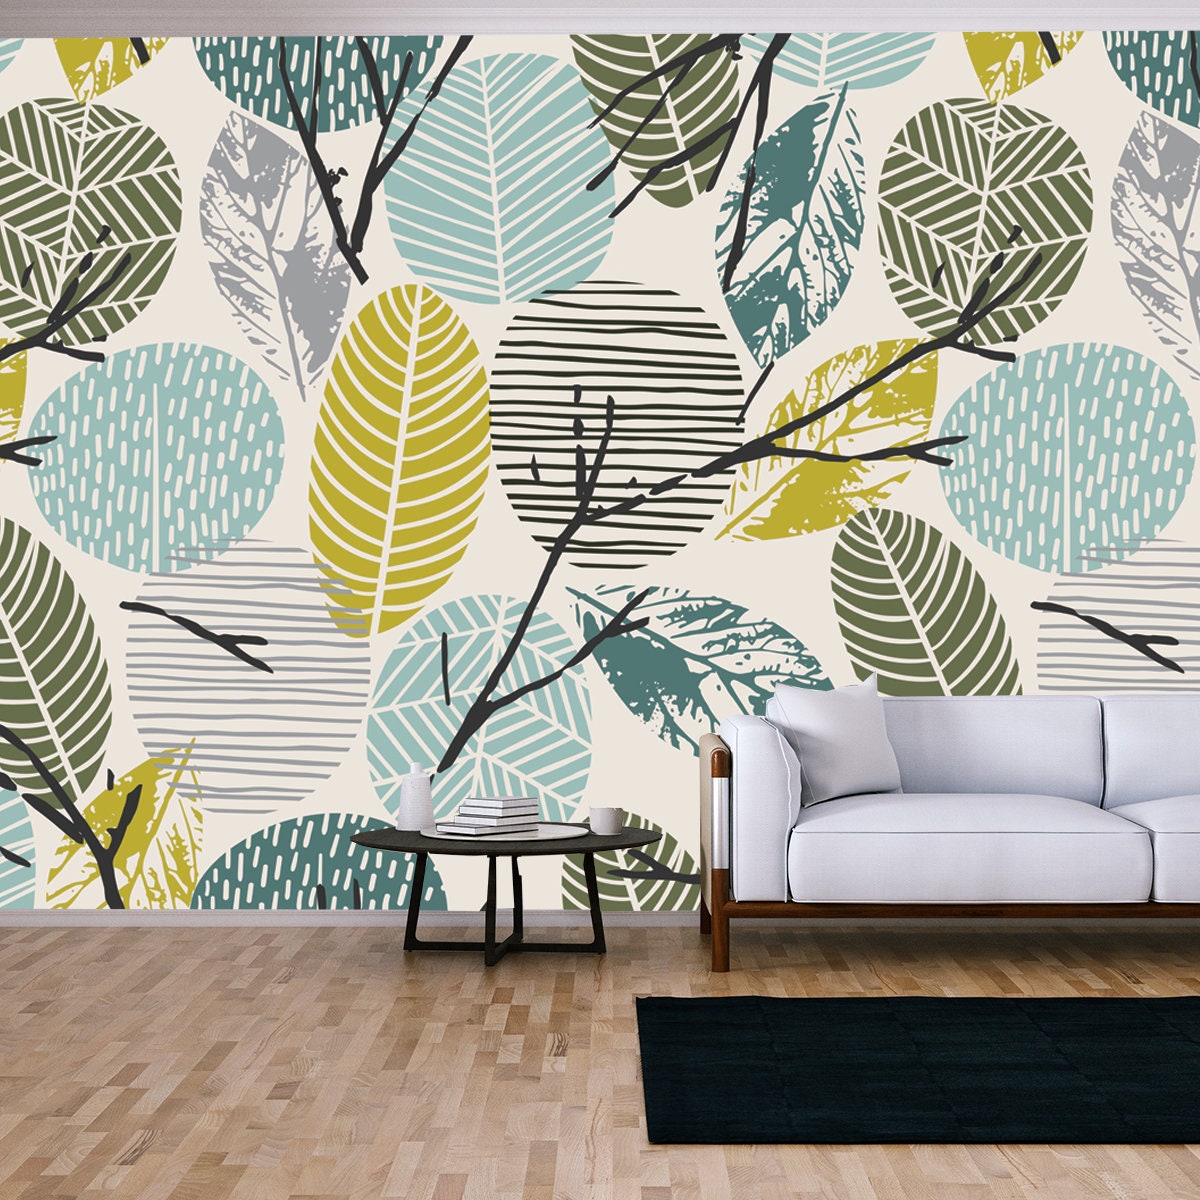 Abstract Autumn Pattern with Trees. Vector Background for Various Surfaces. Trendy Hand Drawn Textures Wallpaper Living Room Mural